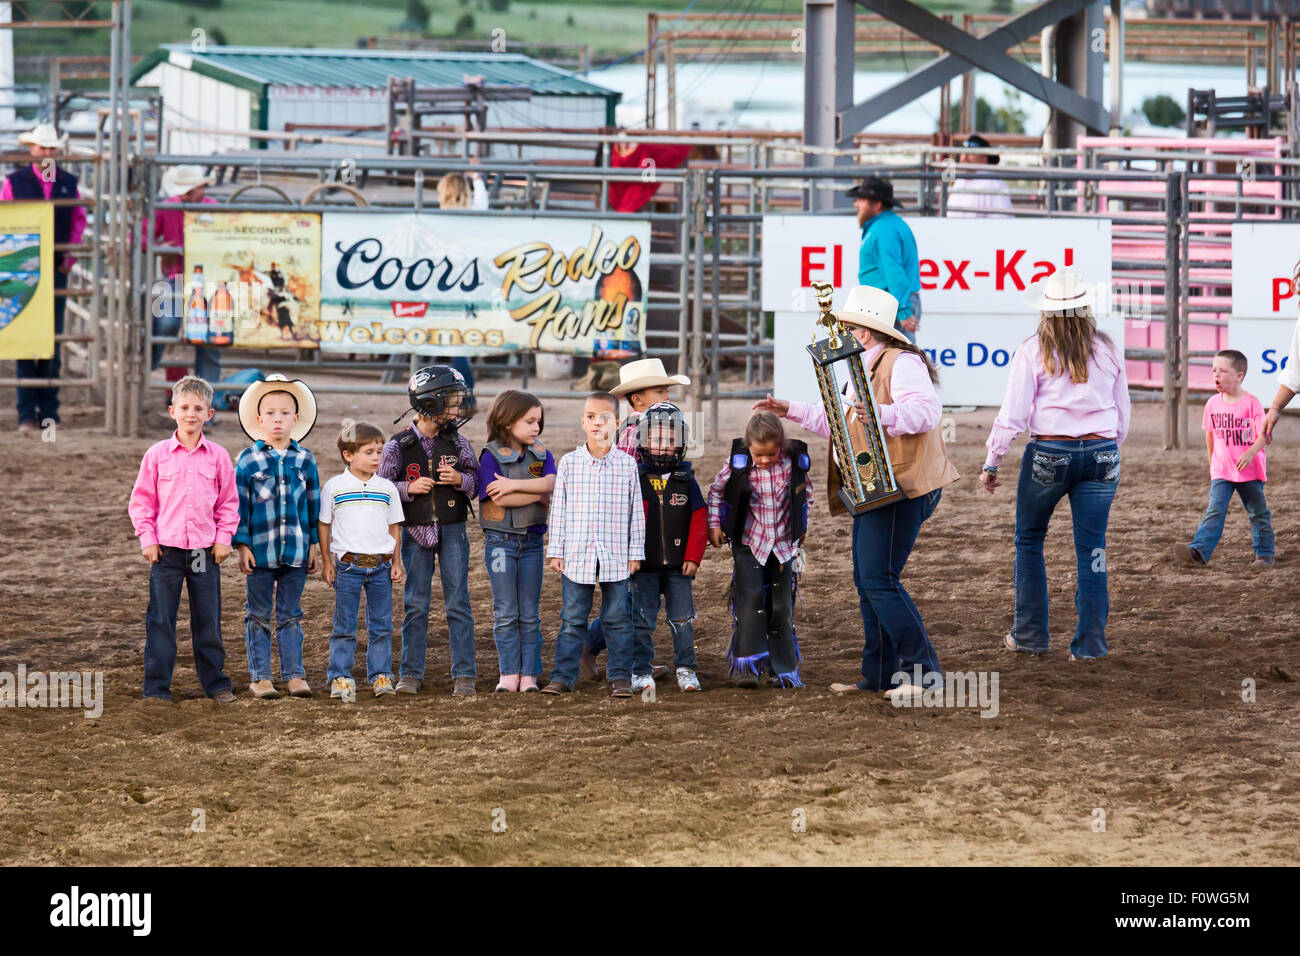 Estes Park, Colorado - An official at the Rooftop Rodeo holds a trophy for the Mutton Bustin' winner. Stock Photo